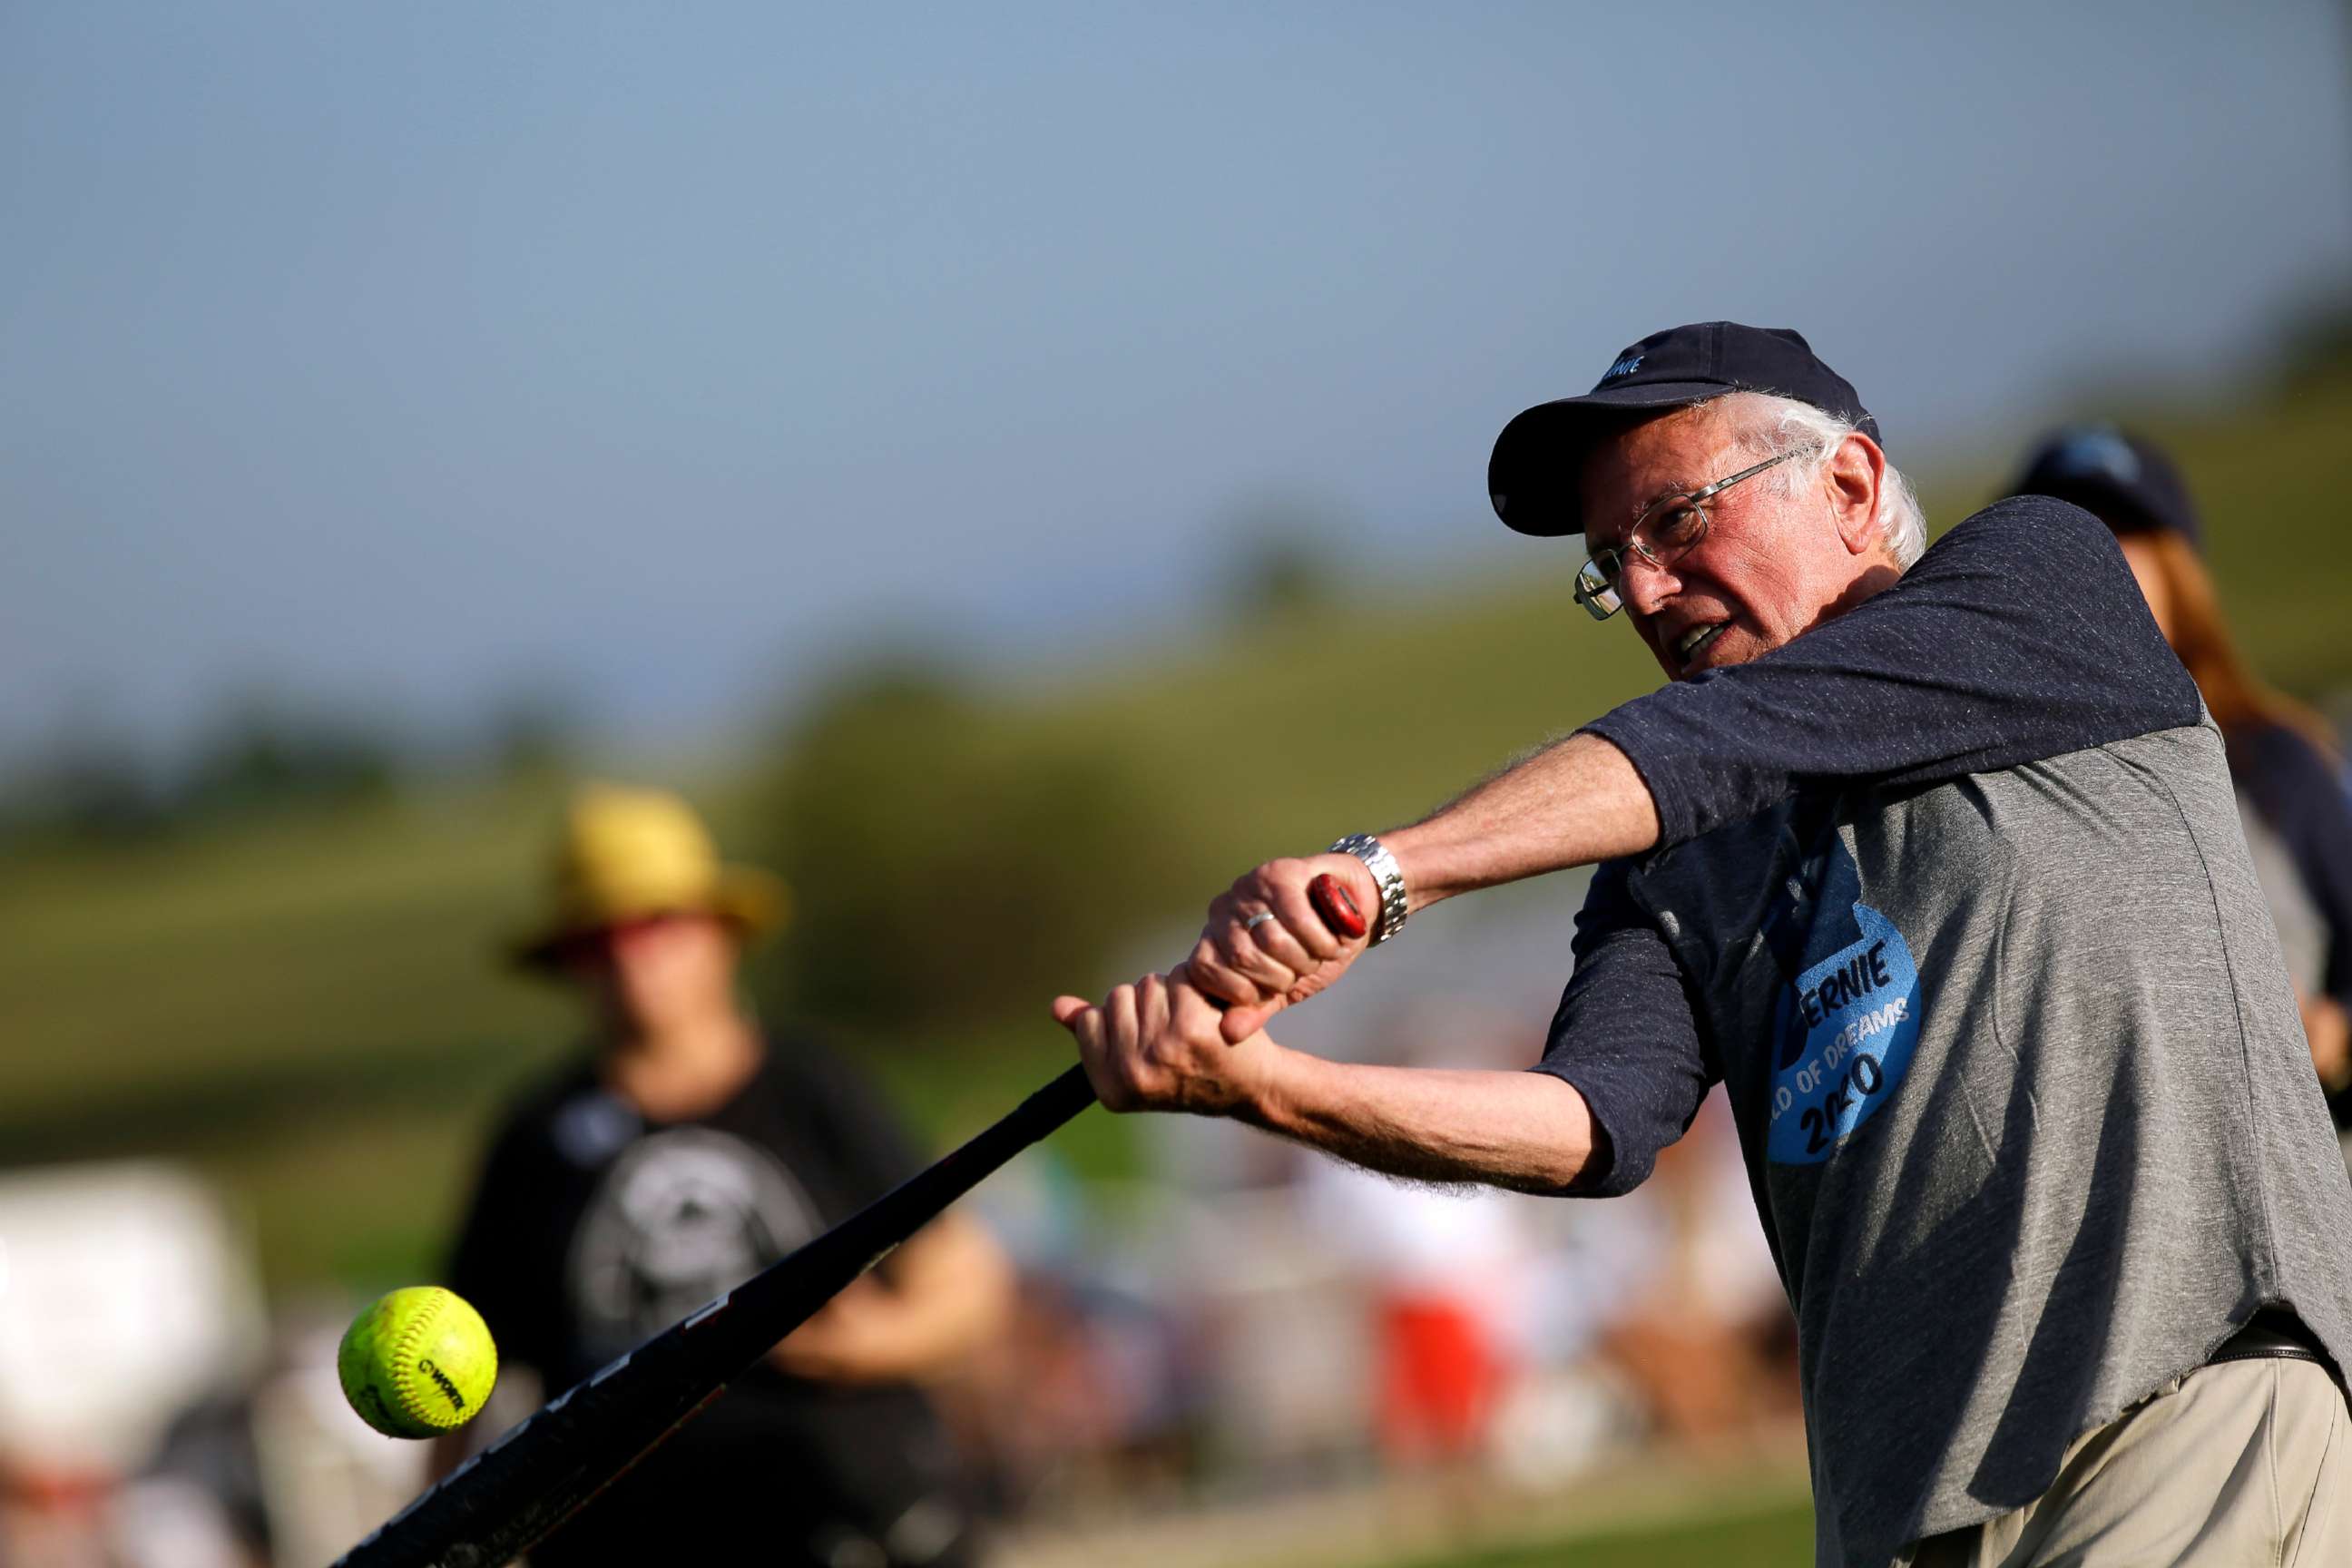 PHOTO: Democratic presidential candidate Sen. Bernie Sanders warms up before his baseball game against the Leaders Believers Achievers Foundation at the Field of Dreams Baseball field on Aug. 19, 2019 in Dyersville, Iowa.